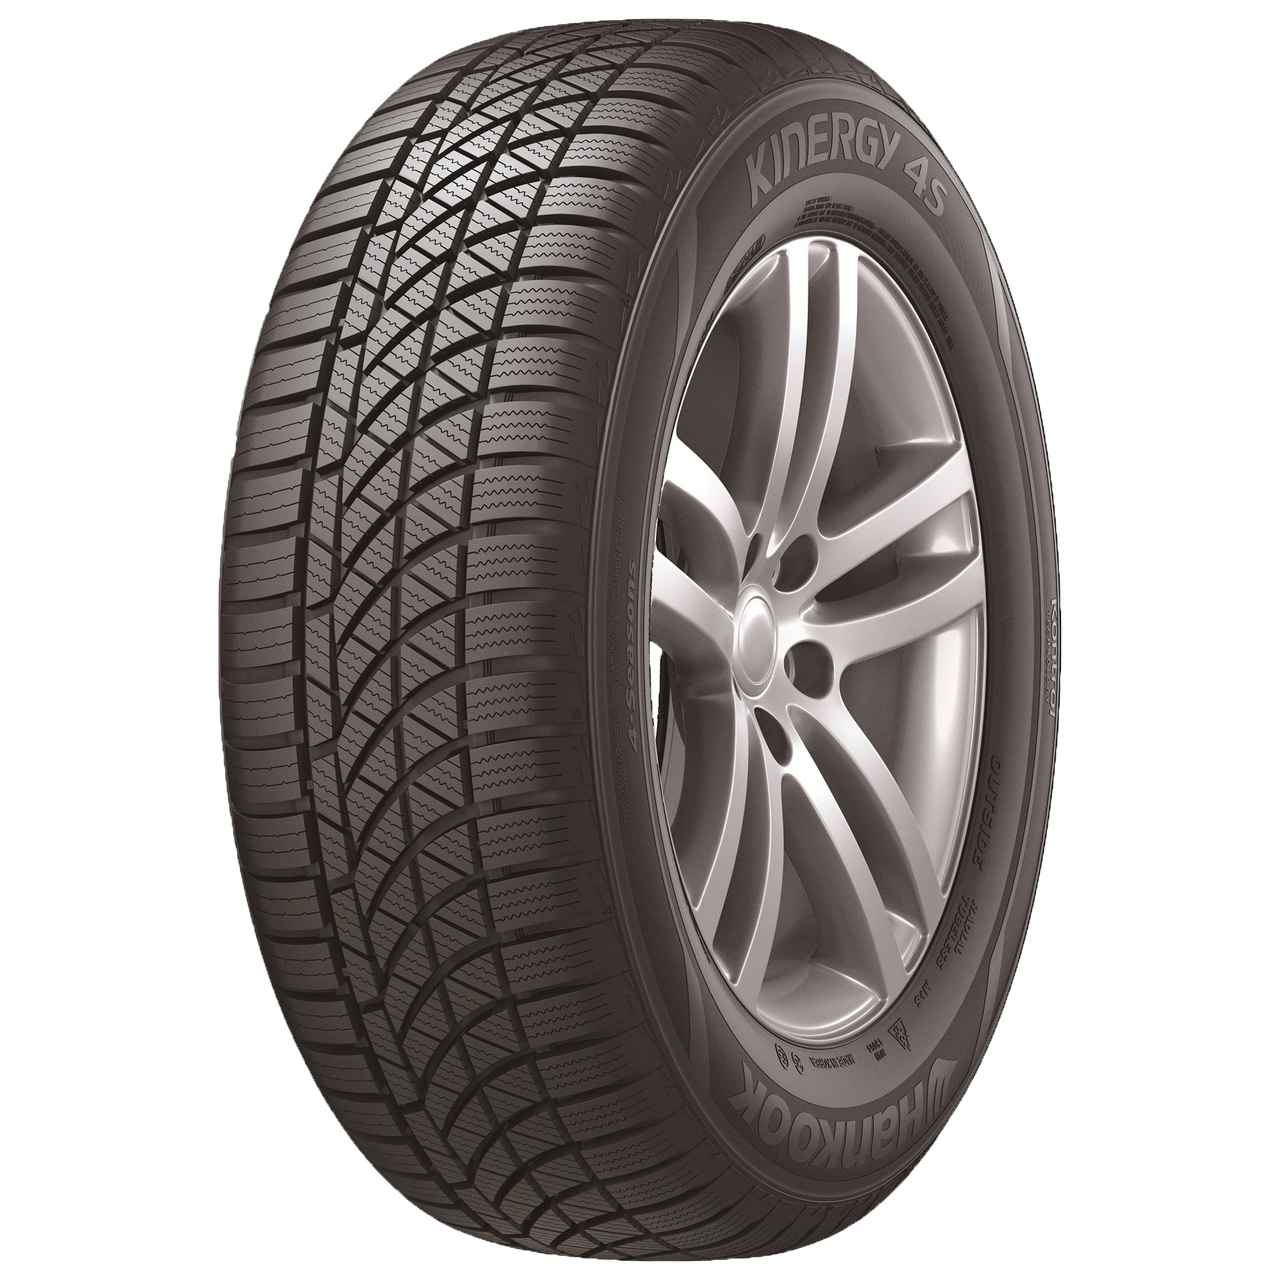 HANKOOK KINERGY 4S (H740) 165/70R13 83T BSW